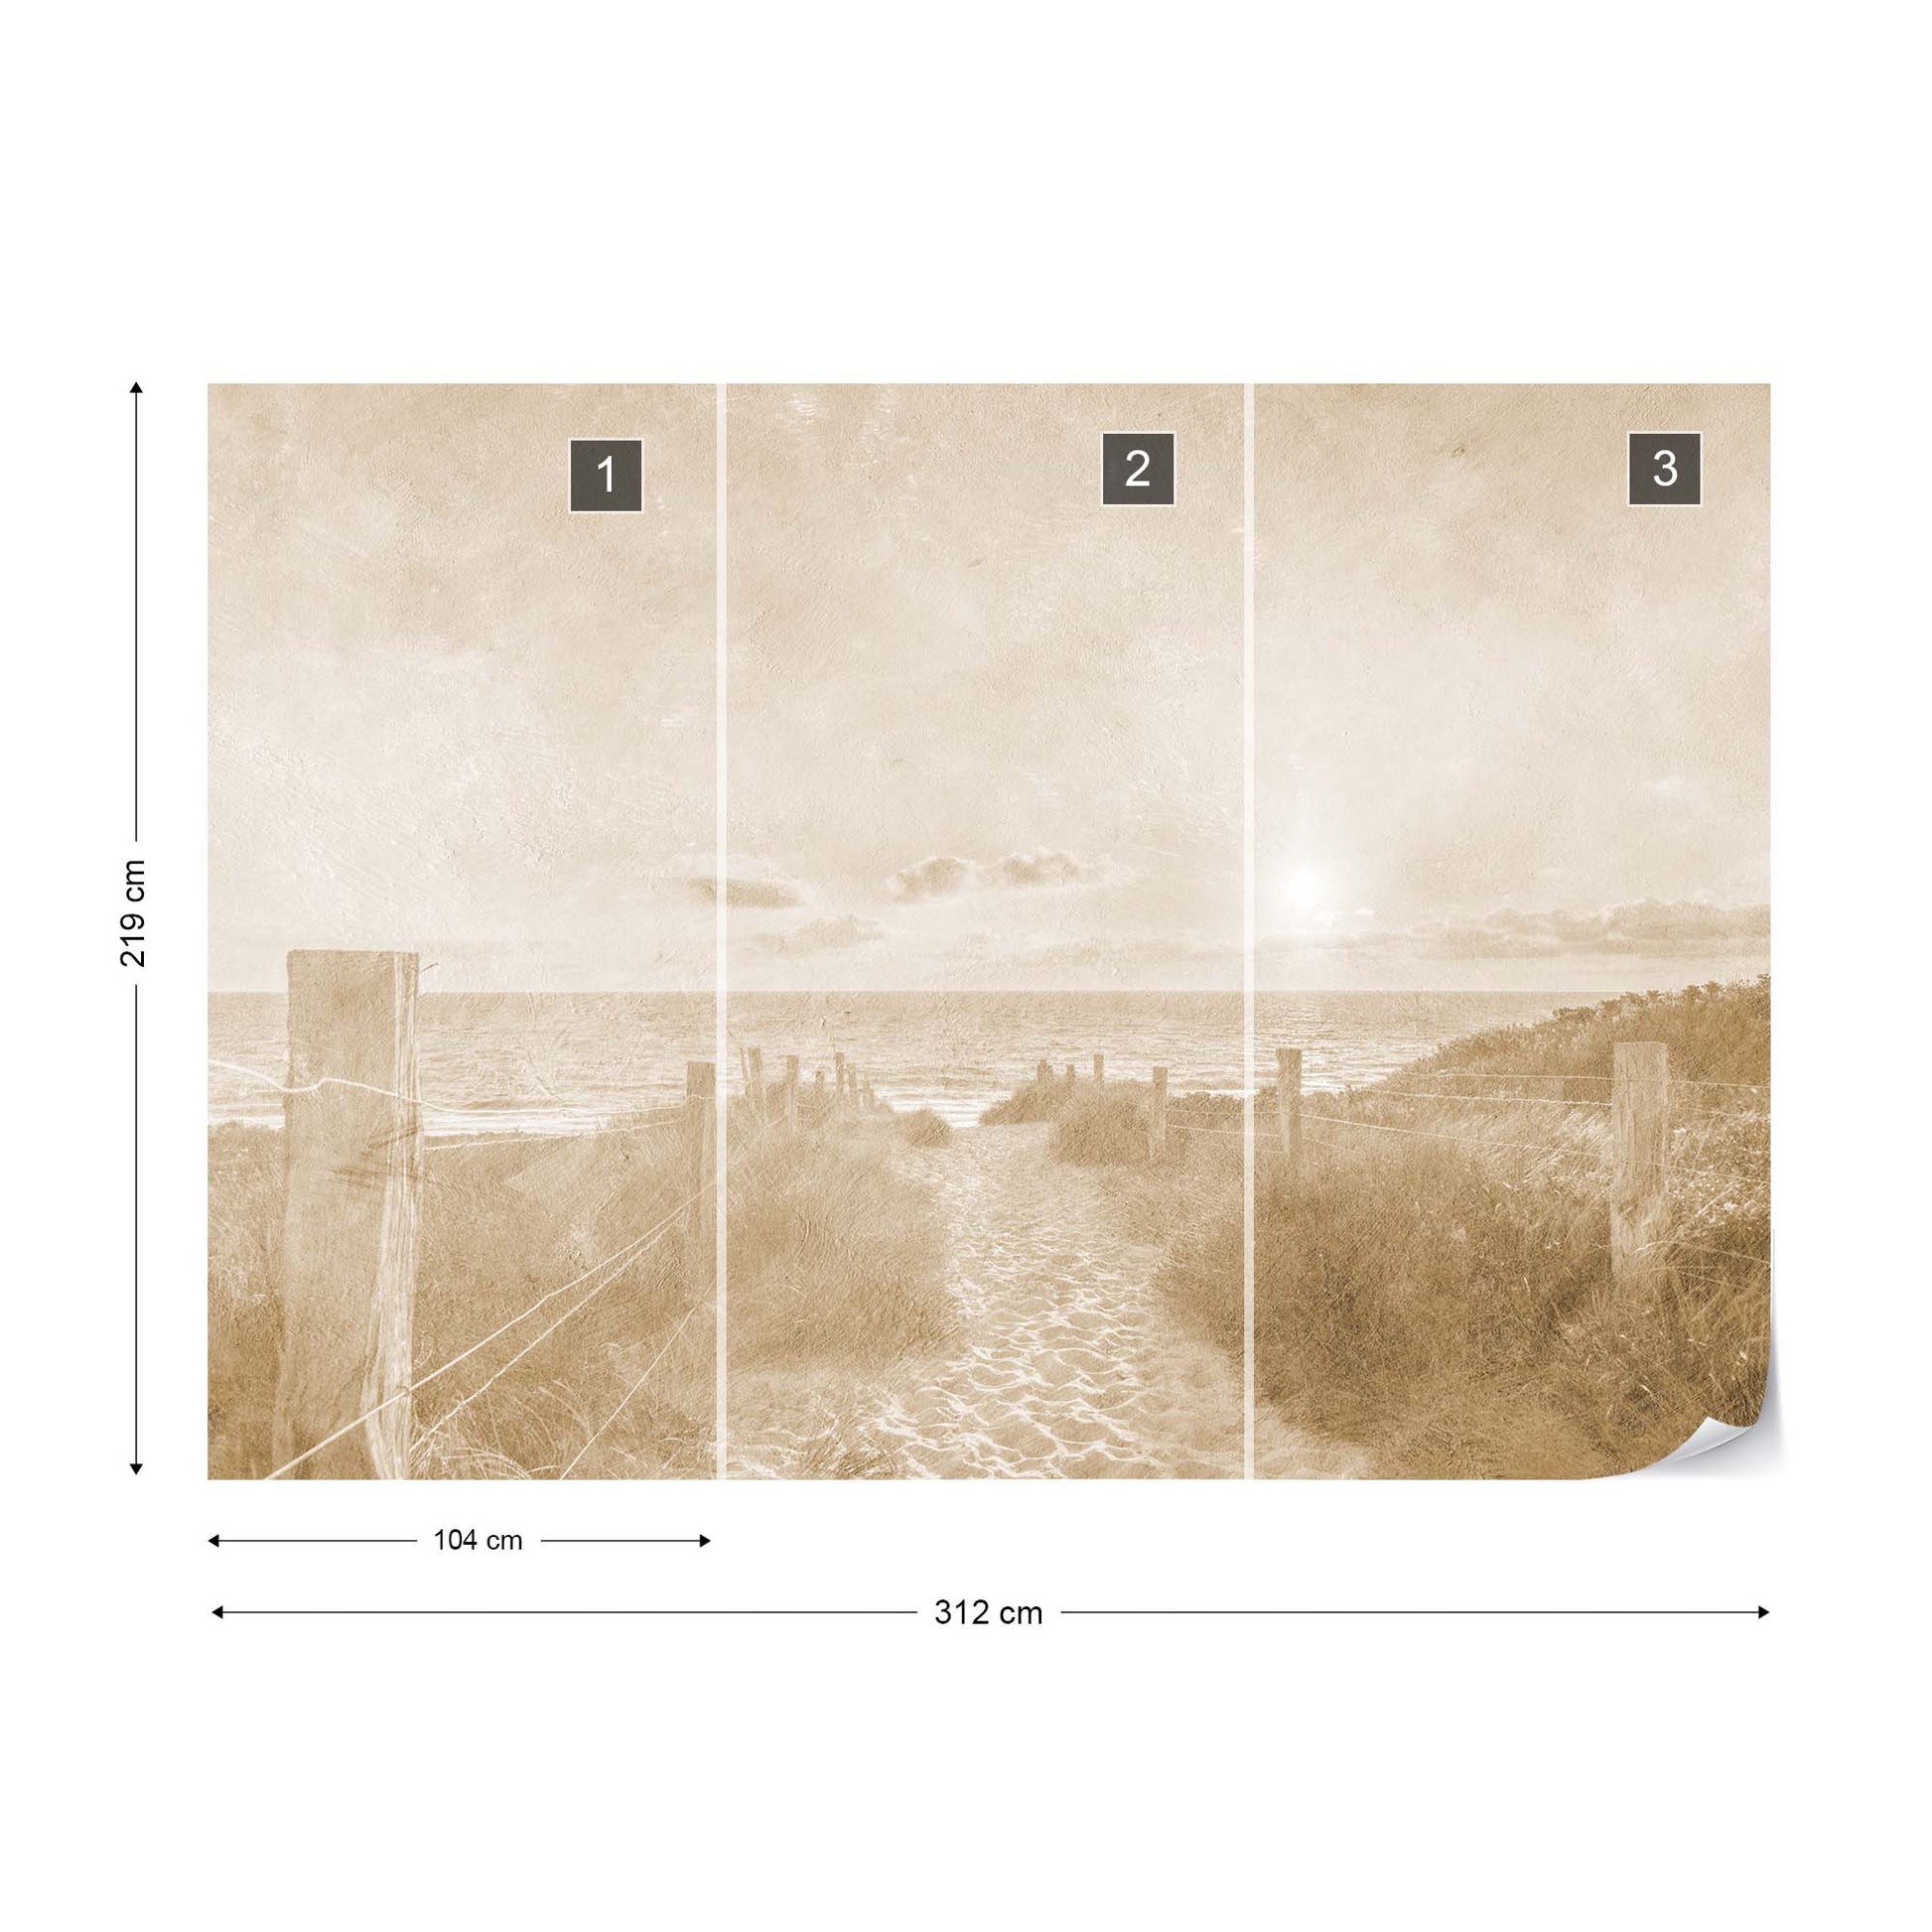 Summer Sunset Faded Vintage Sepia Wallpaper Waterproof for Rooms Bathroom Kitchen - USTAD HOME